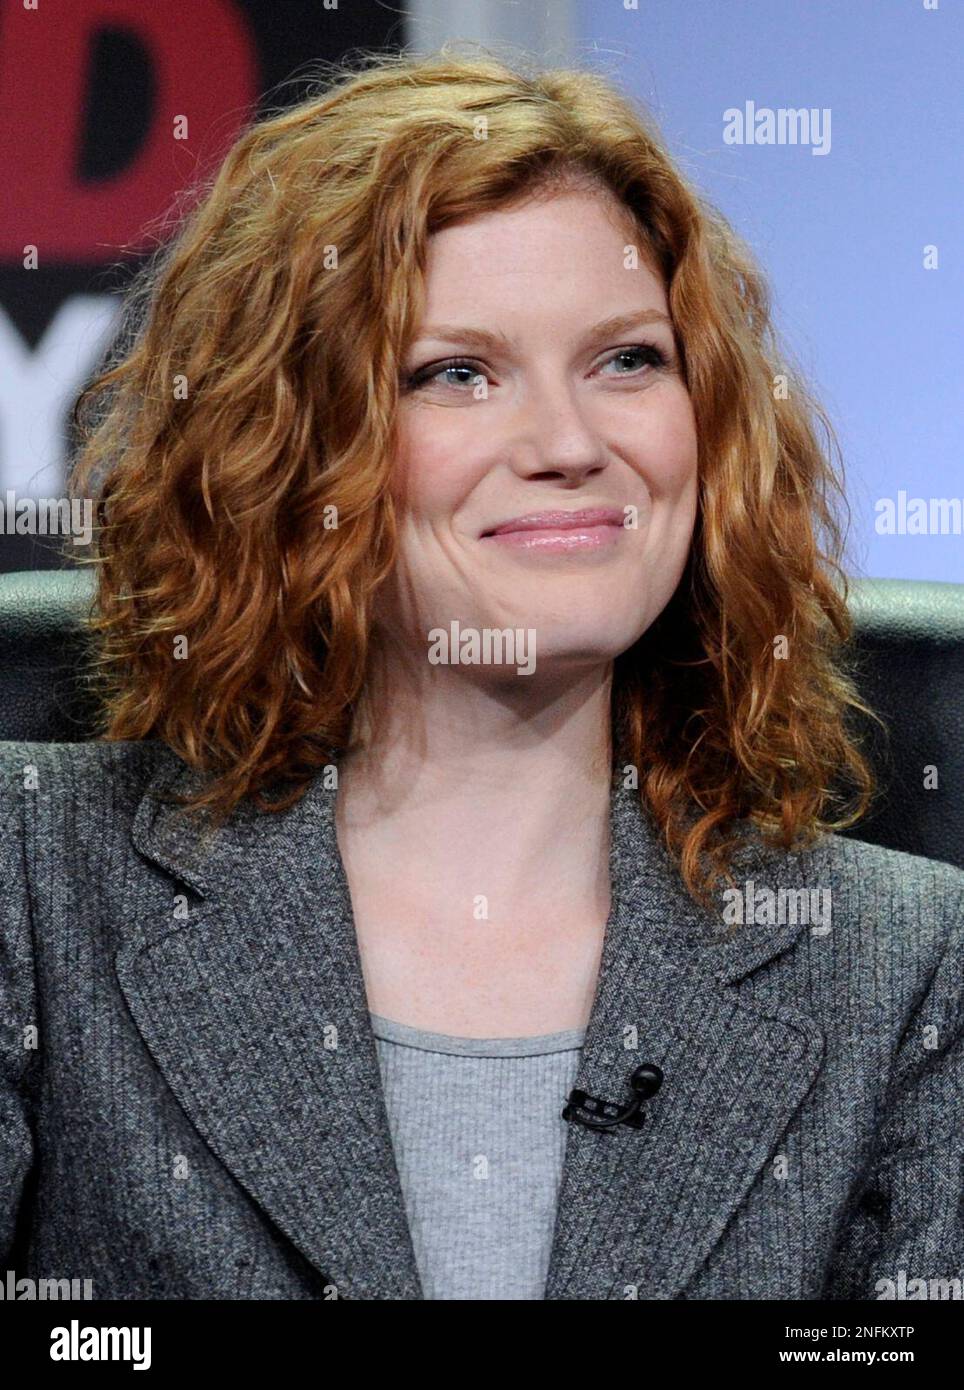 Amy Price-Francis, a cast member in the A&E drama series "The Cleaner," participates in a panel discussion during the Television Critics Association summer press tour in Beverly Hills, Calif., Wednesday, July 9, 2008. (AP Photo/Chris Pizzello) Stock Photo